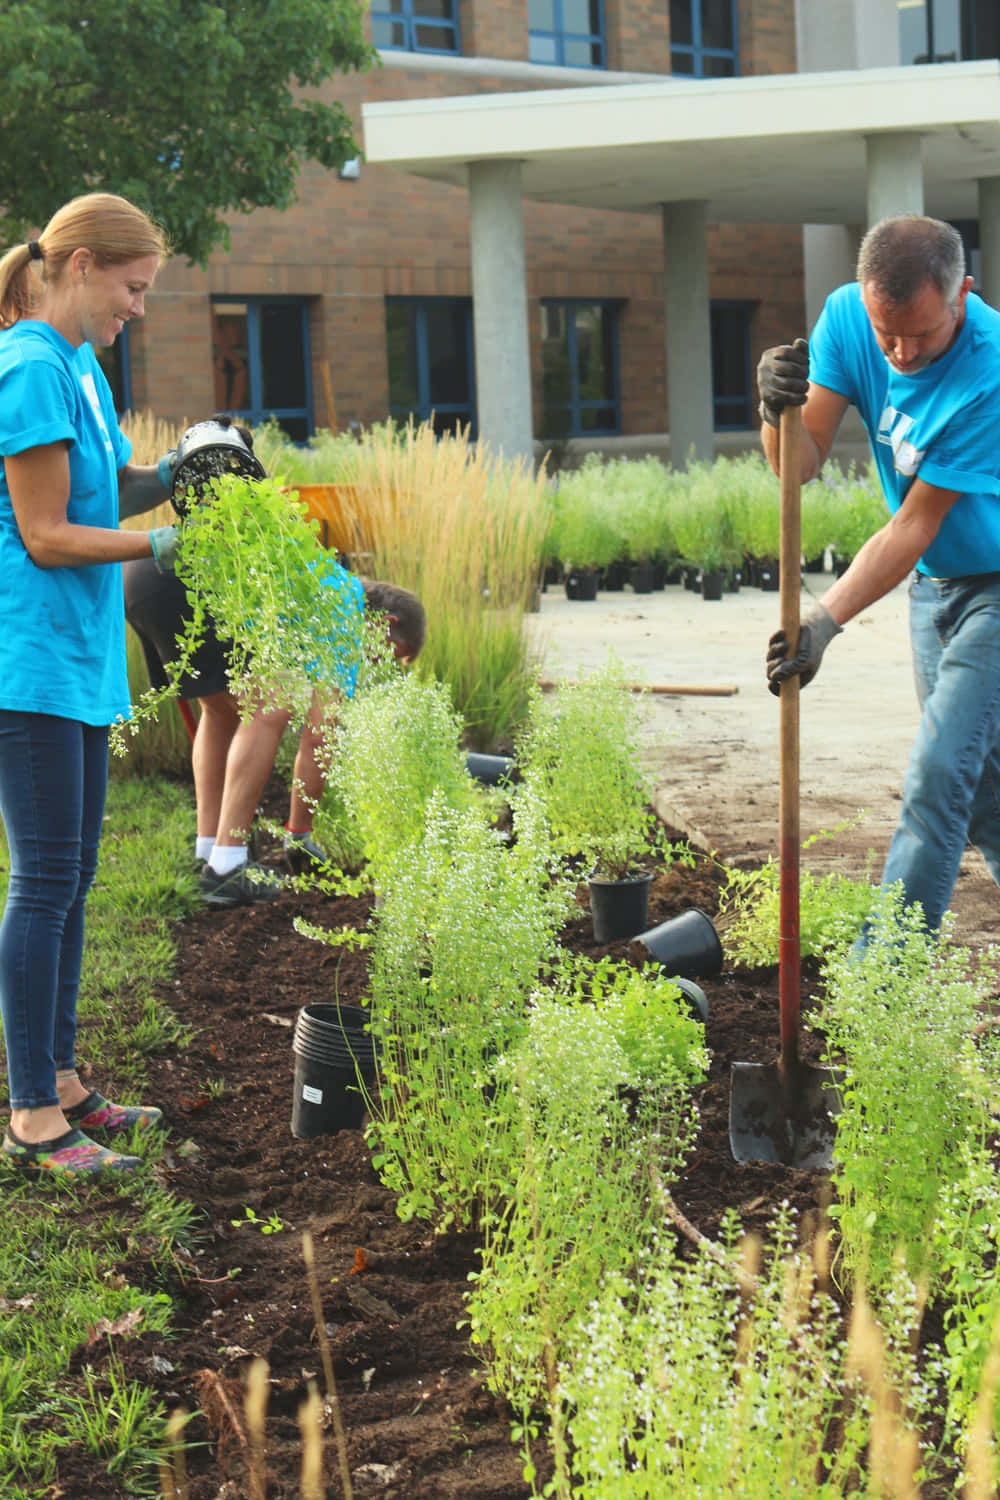 A Group Of People Planting Plants In A Garden